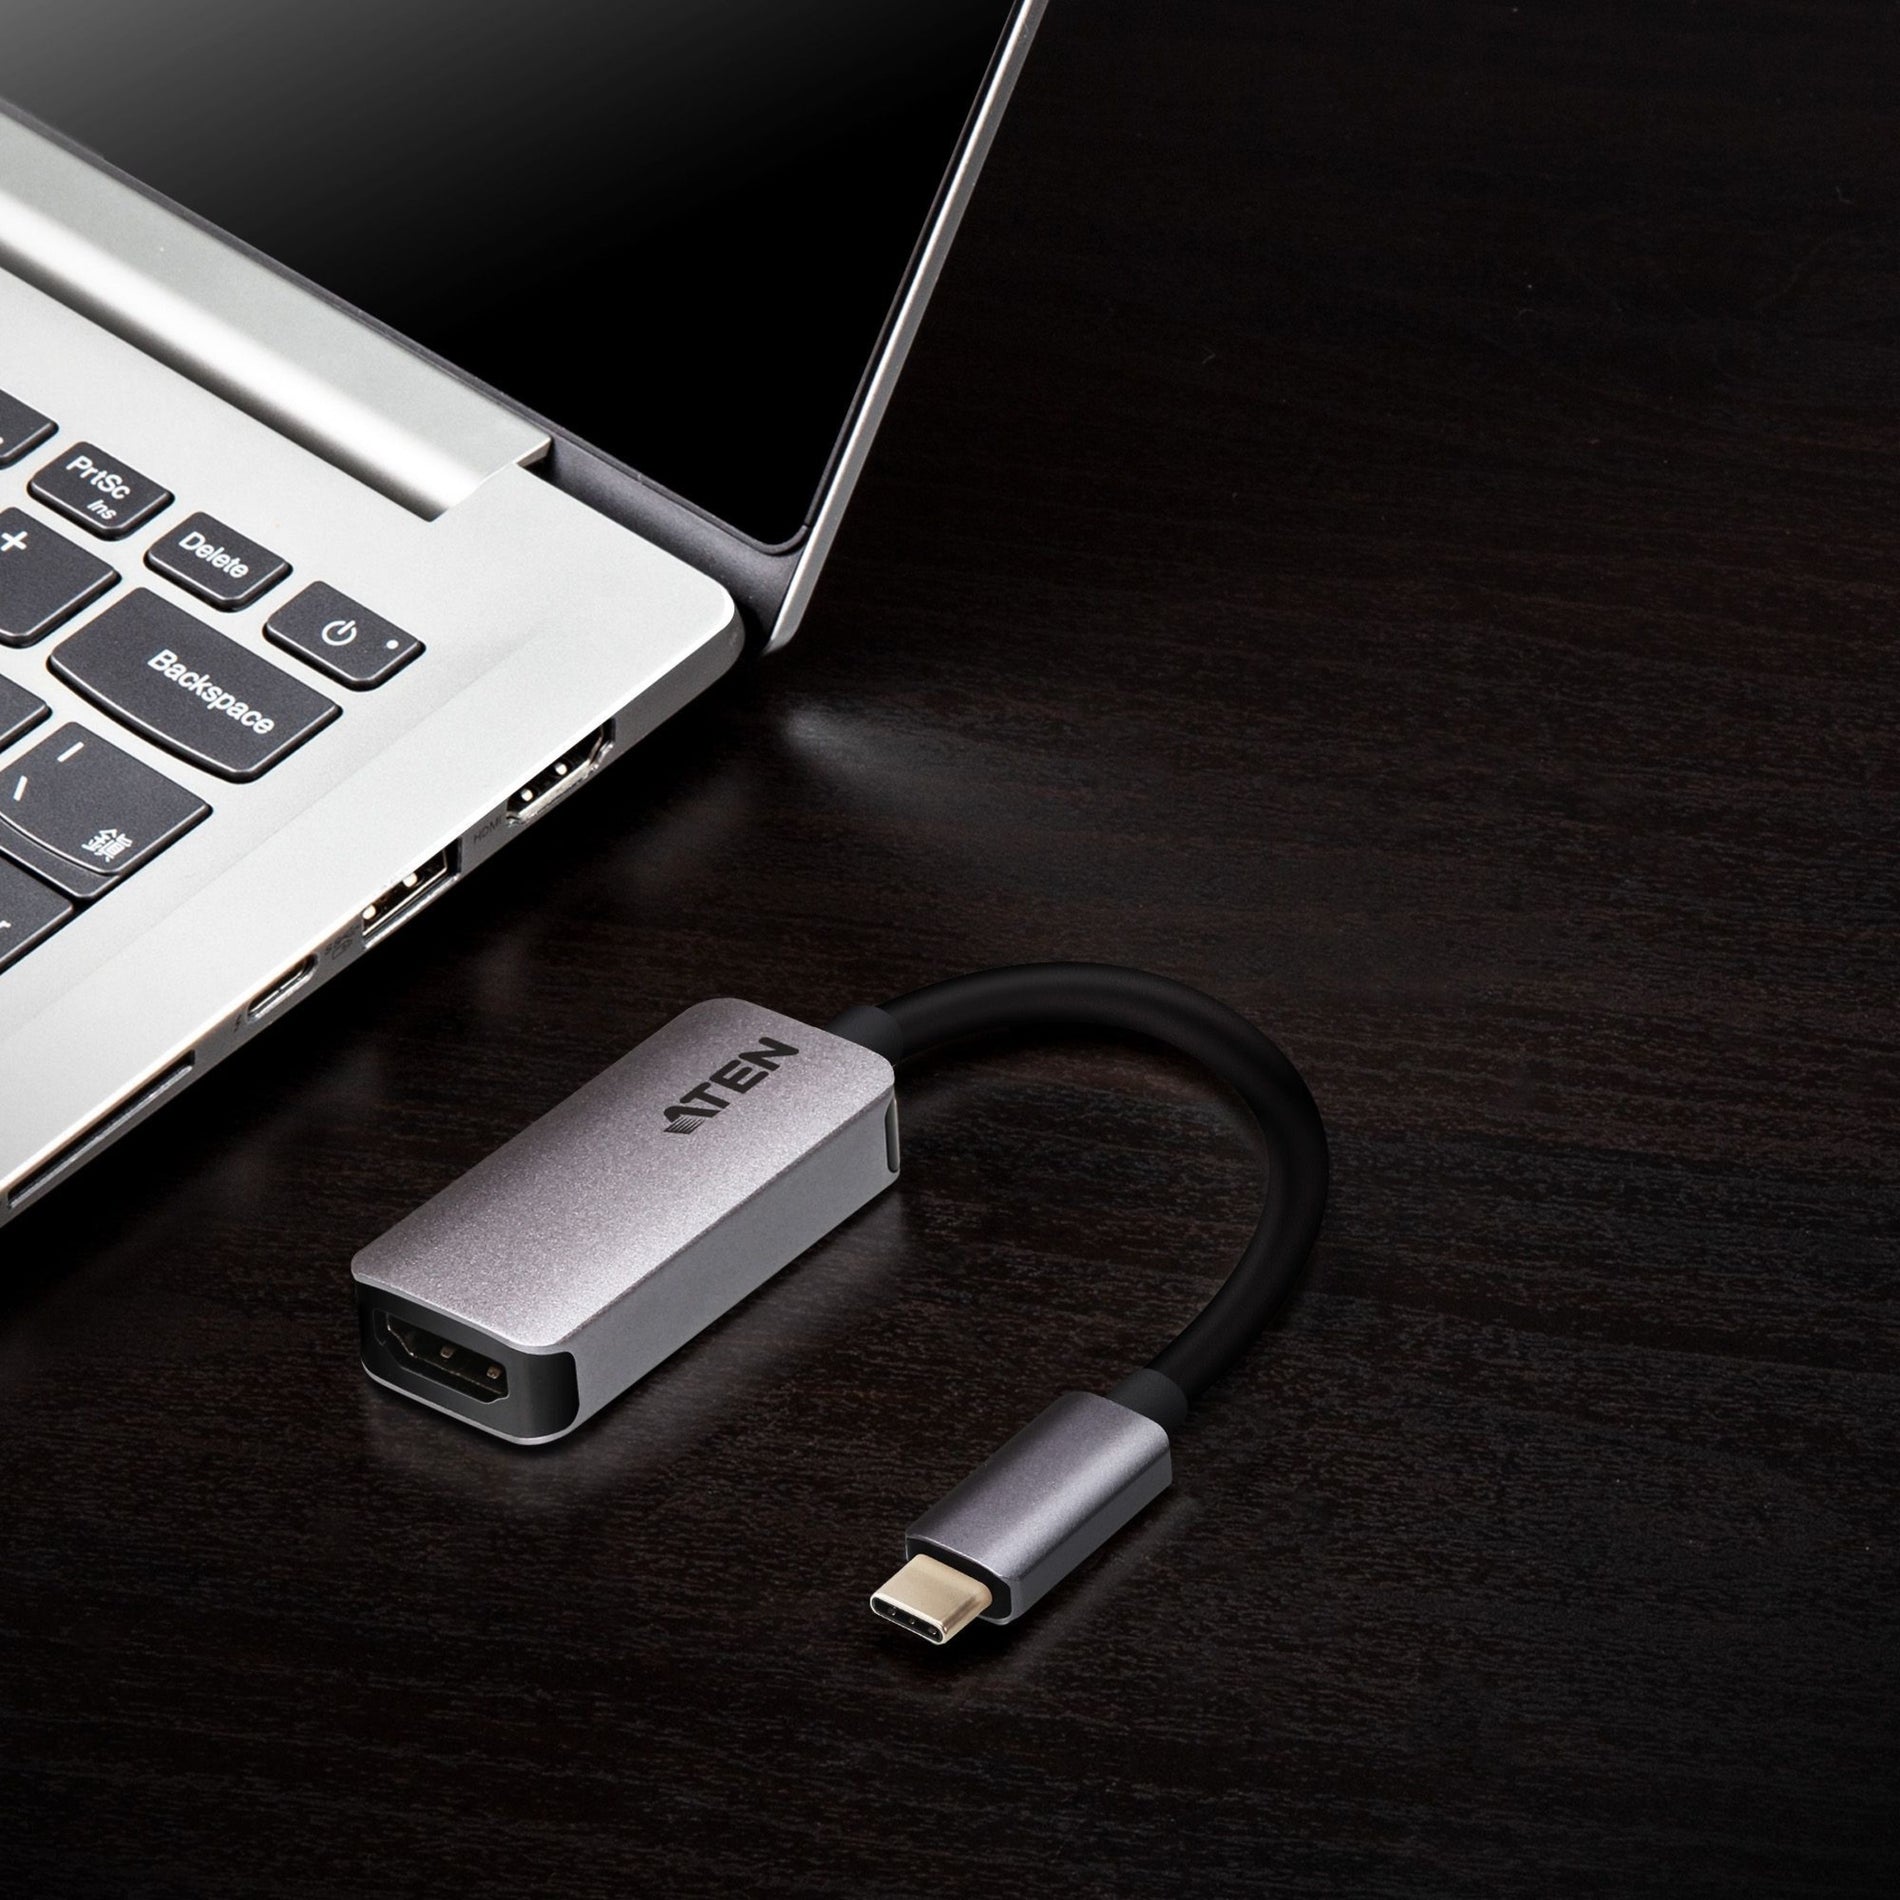 ATEN UC3008A1 USB-C to HDMI 4K Adapter, HDCP 2.2, Plug and Play